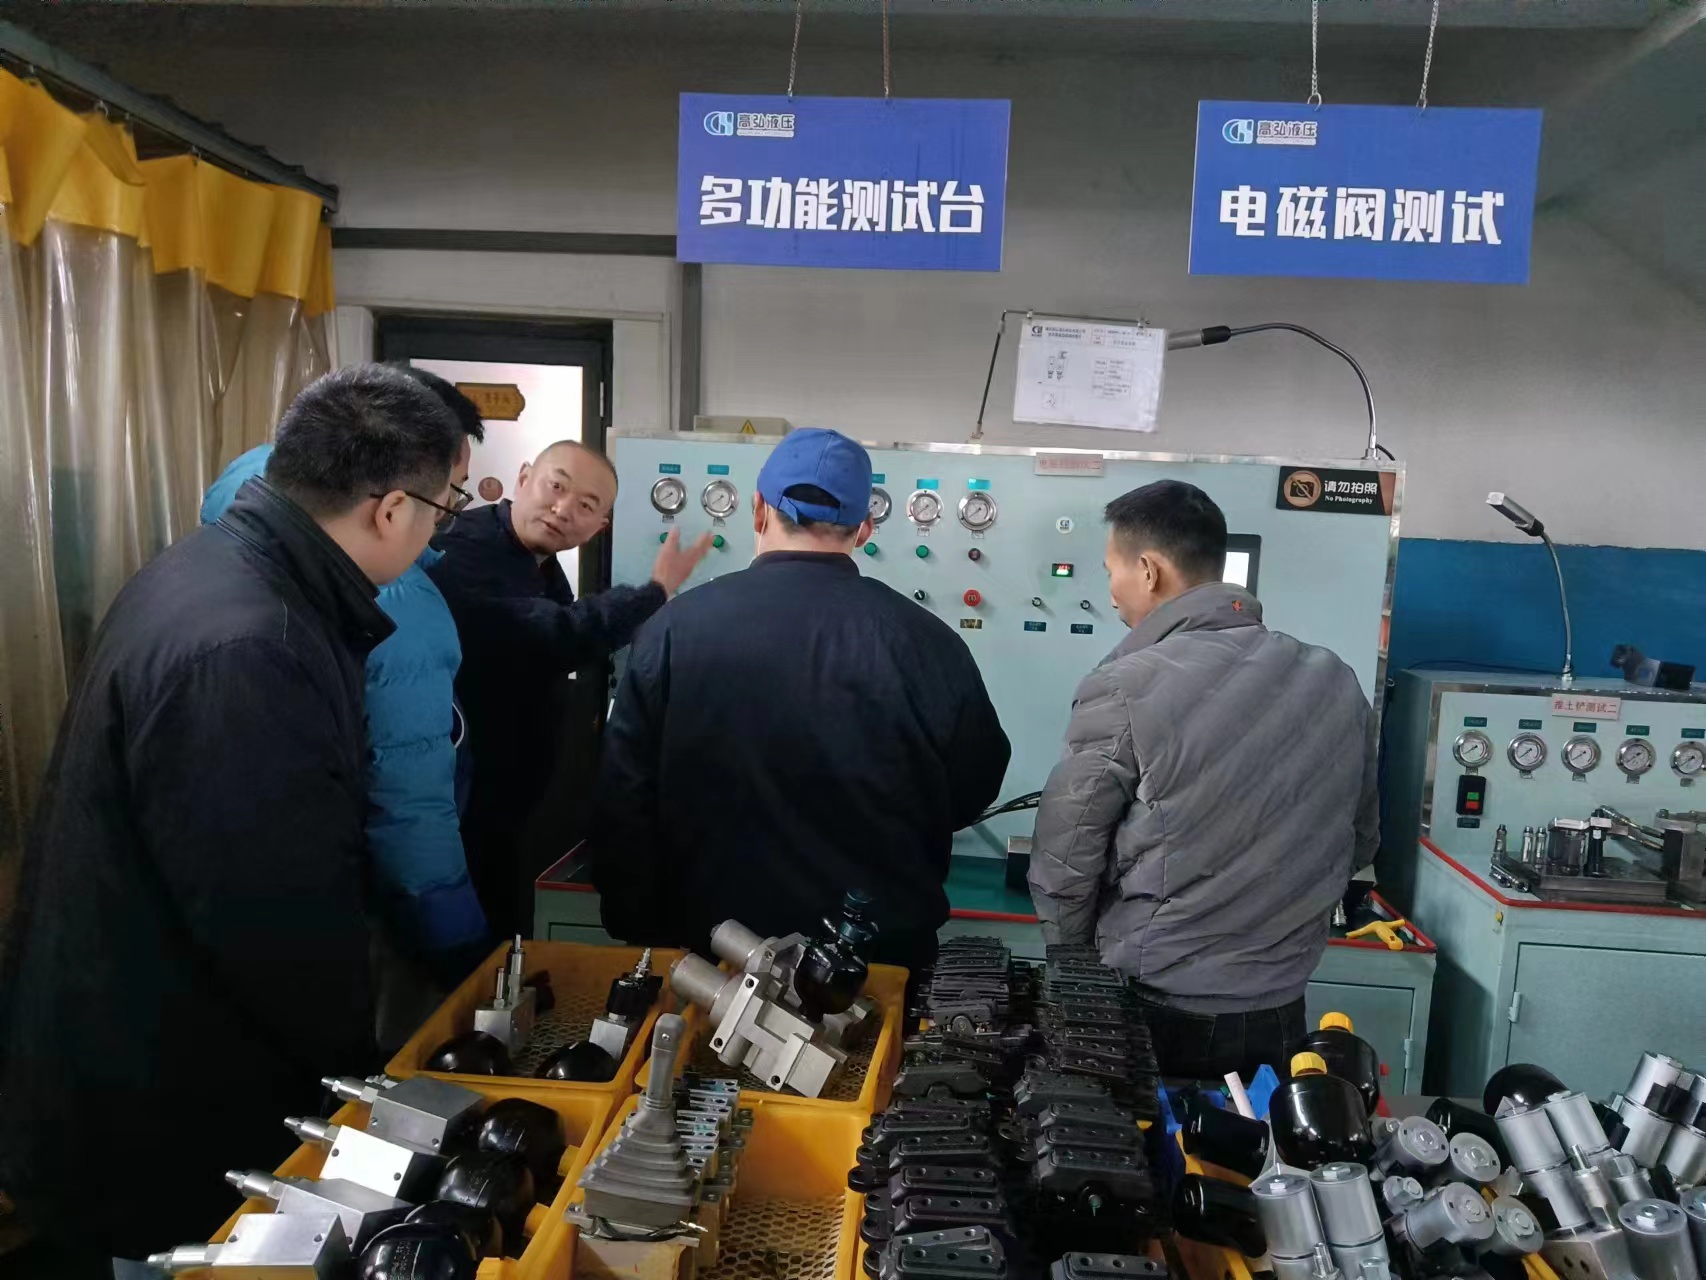 On February 19, Li Wenrong, president of the research institute of Guangxi Yuchai Heavy Industry Co., Ltd., and the leaders of the Procurement Department of the Quality Department visited Gaohong Hydraulic to inspect and guide the supply.